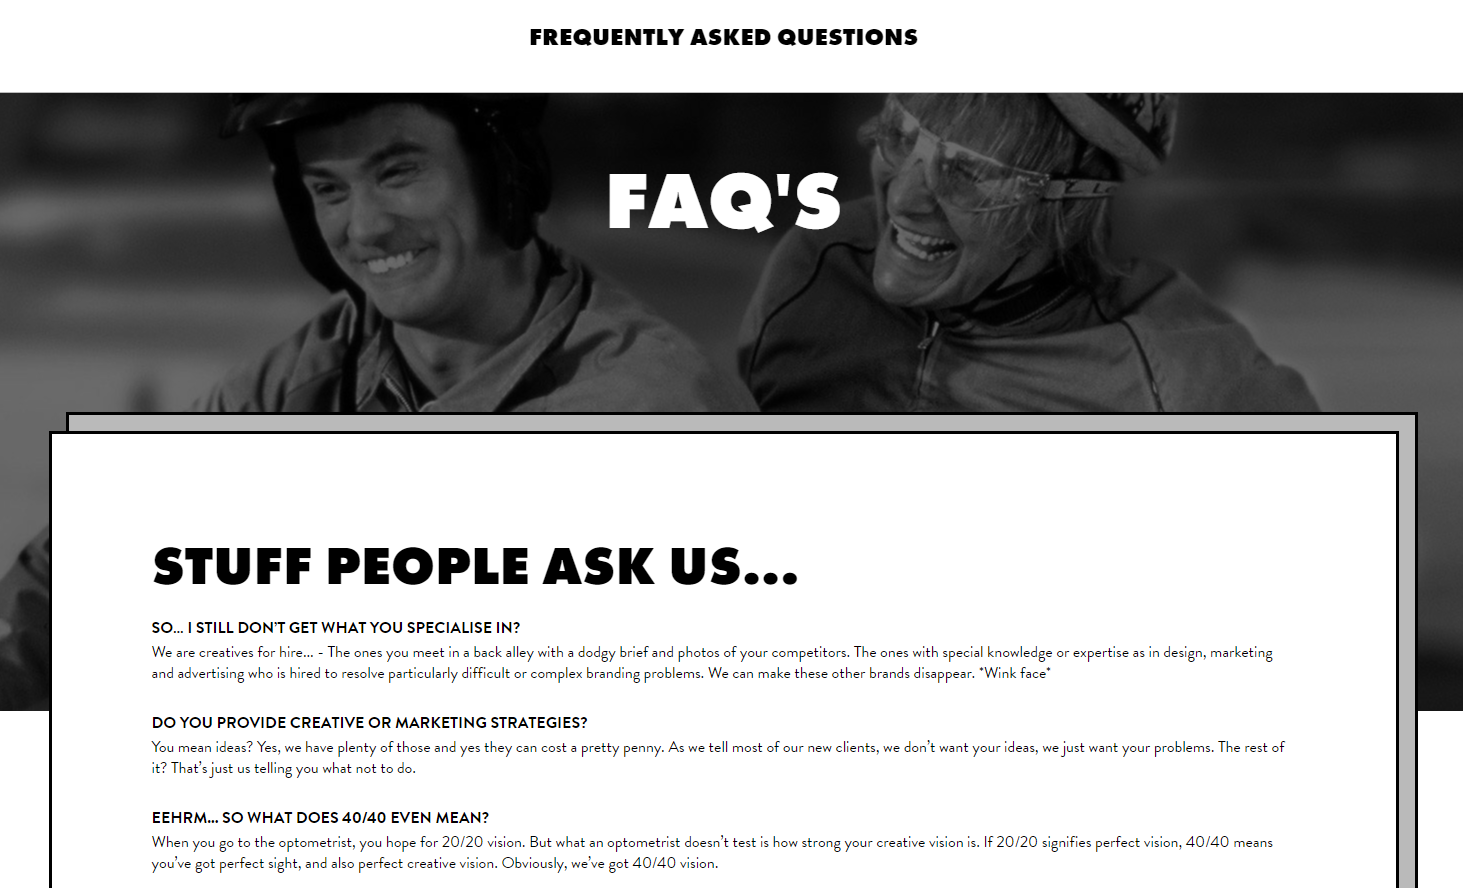 The FAQ page of 40/40 Creative Agency is kept in a humorous style